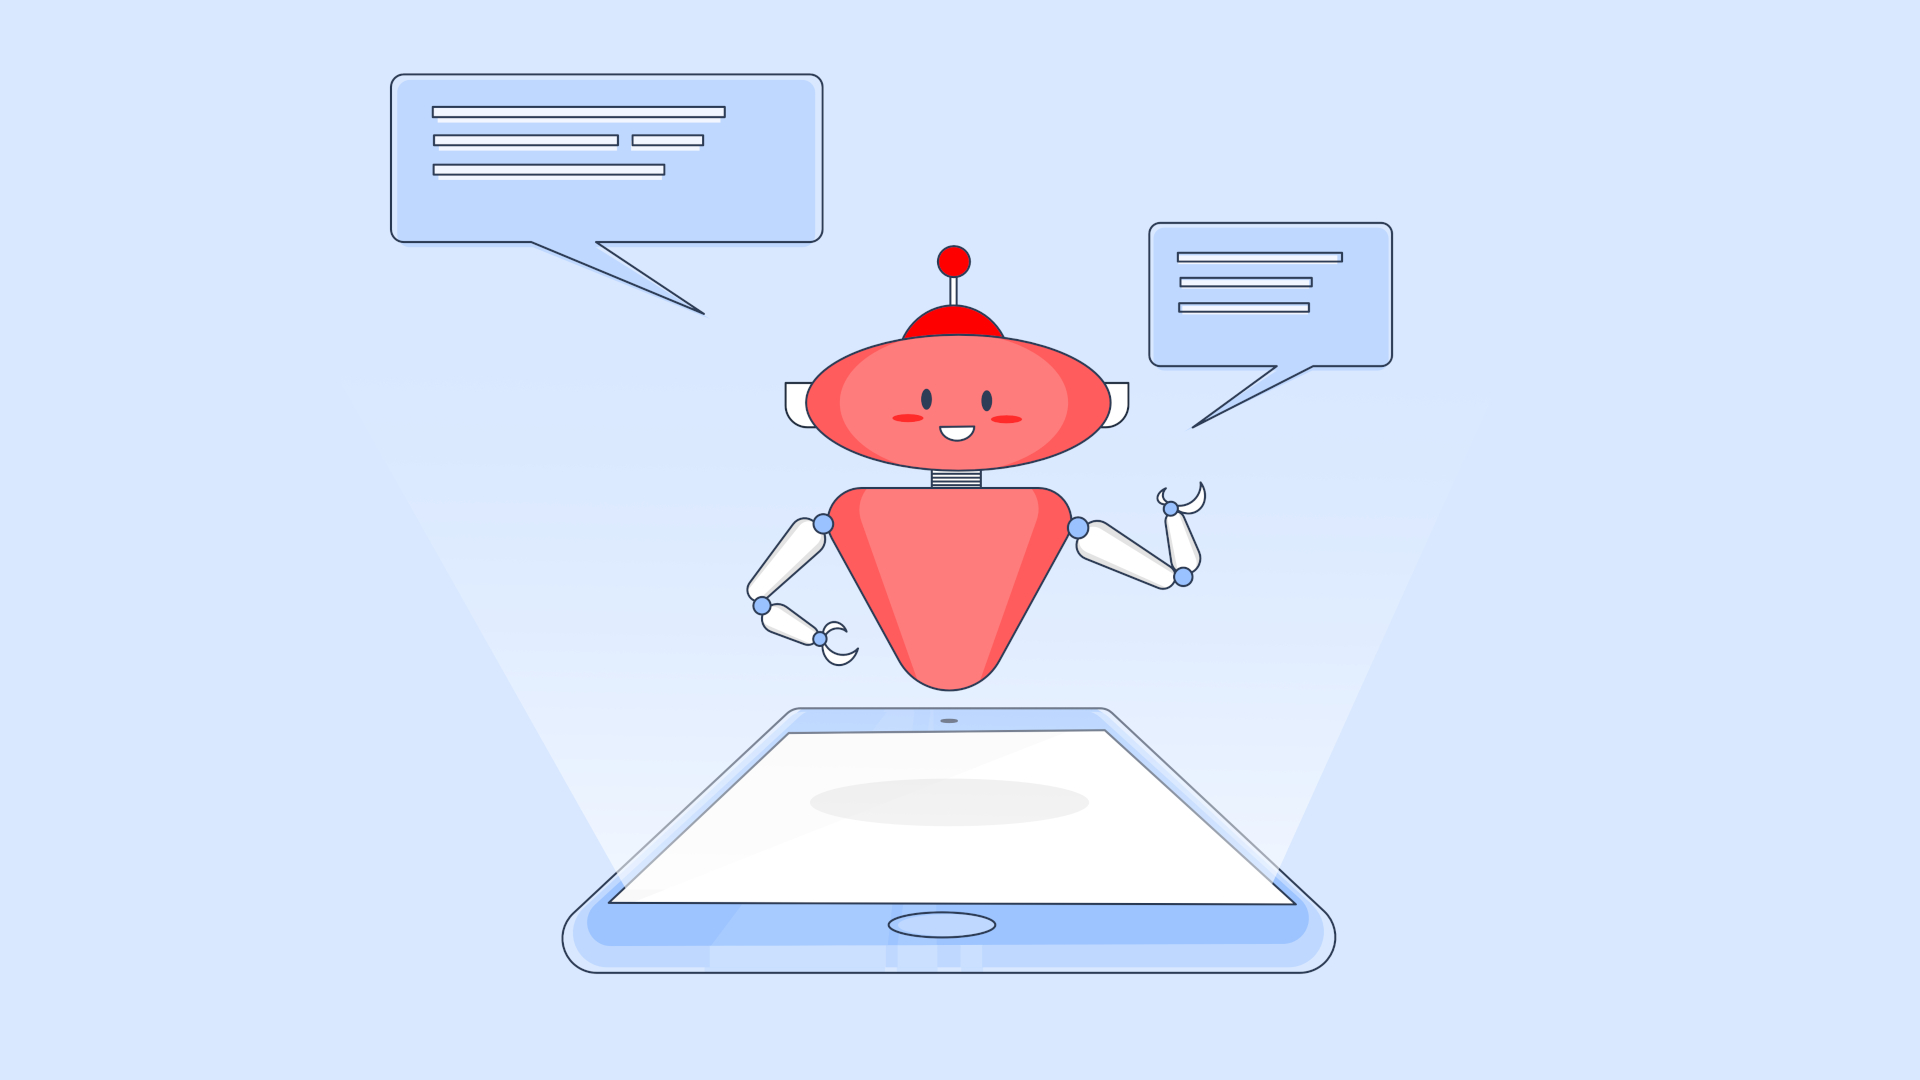 A red AI chatbot pops up on a smartphone for talking with people.